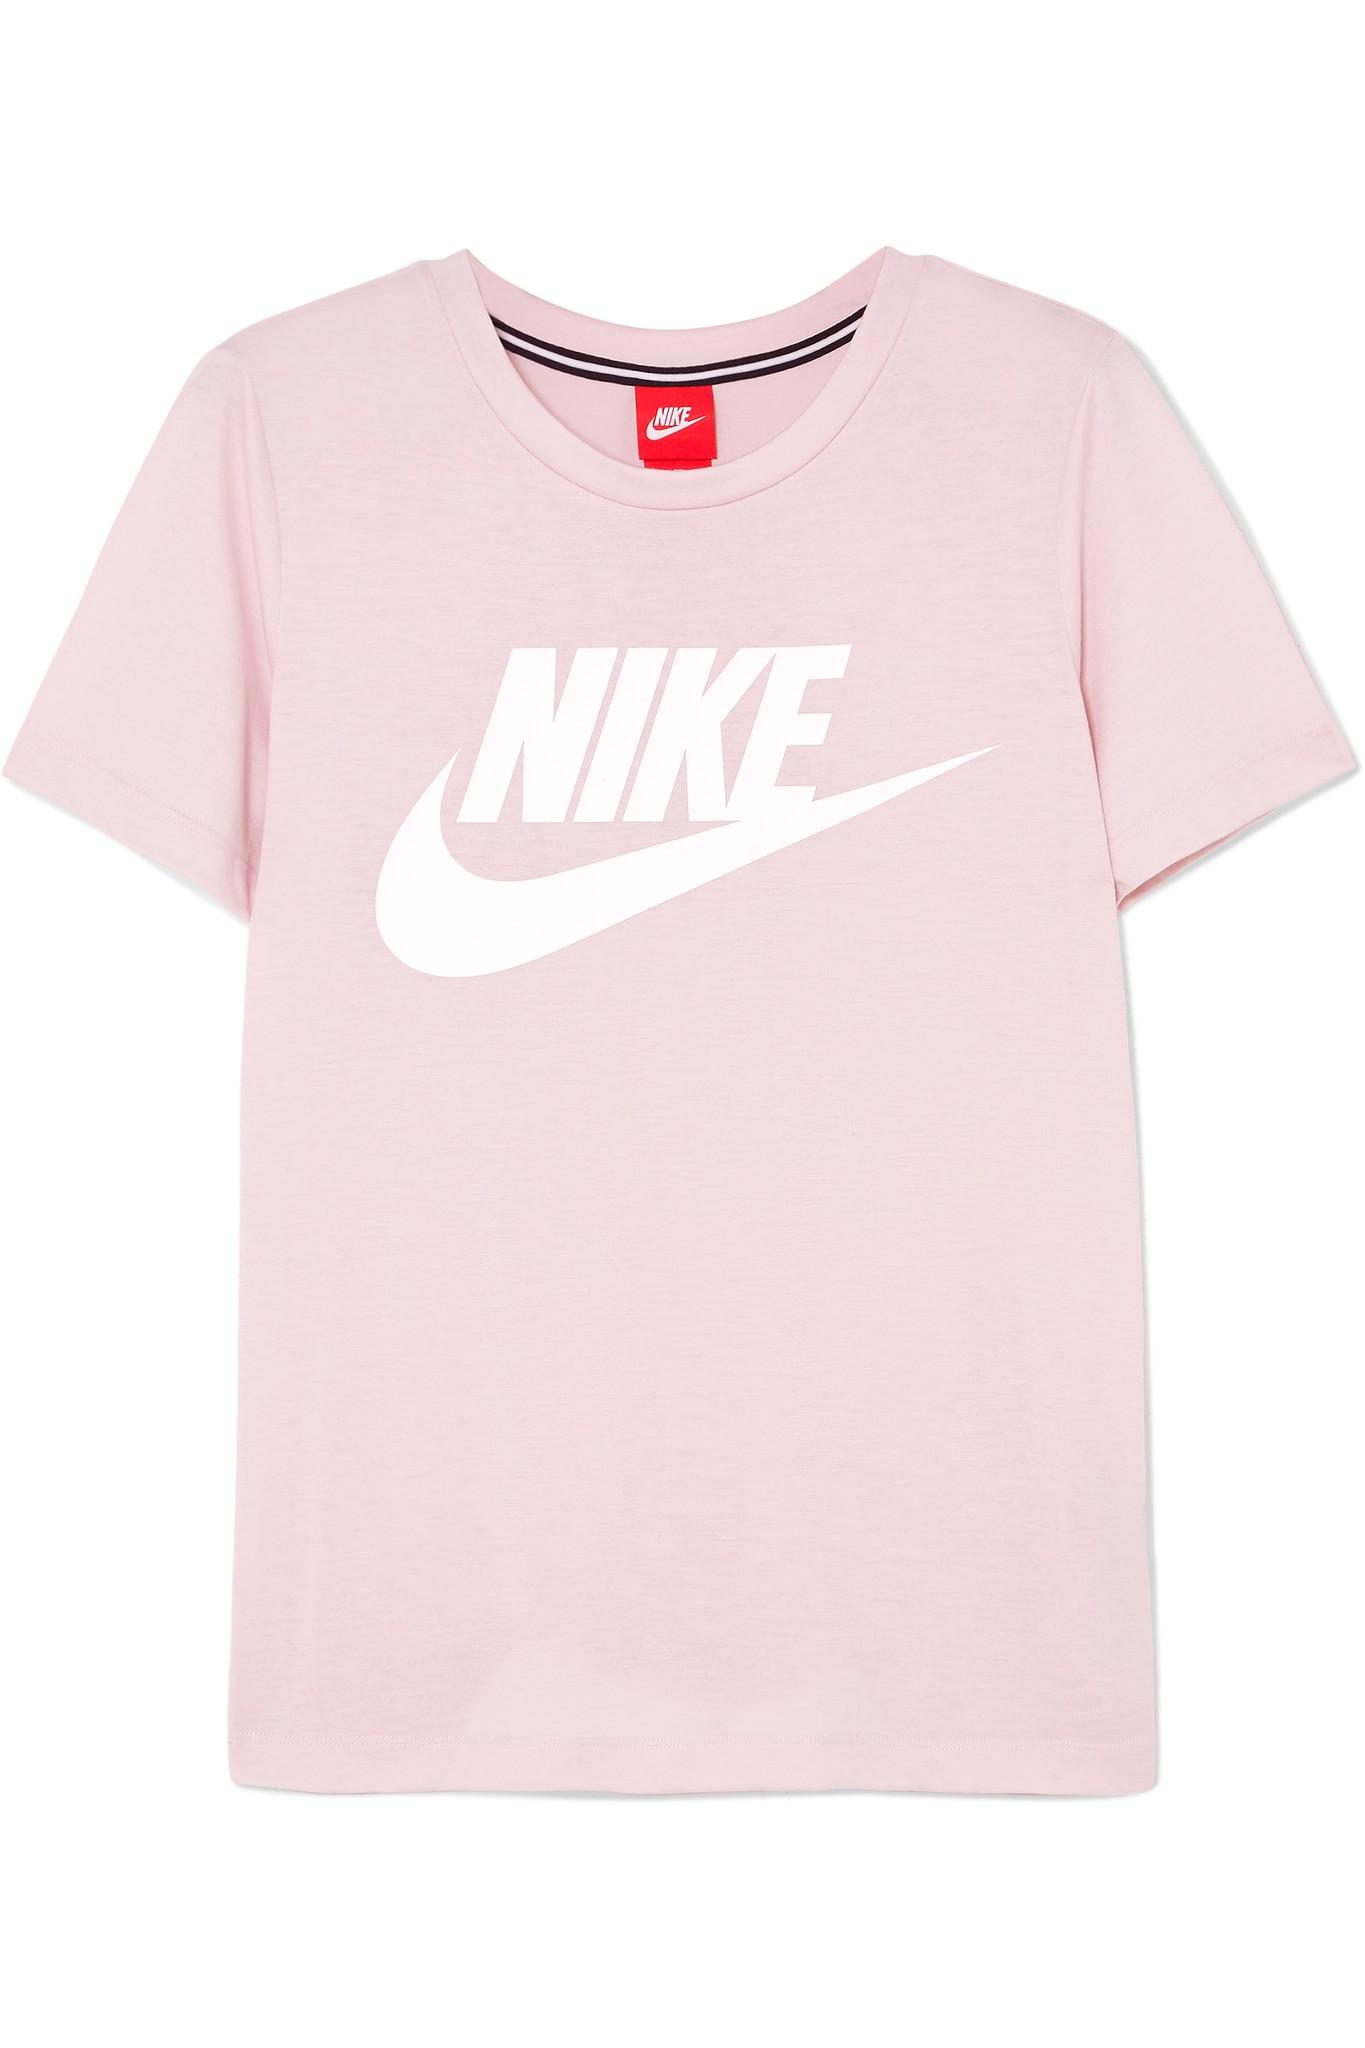 pink nike t shirts Online Shopping for 